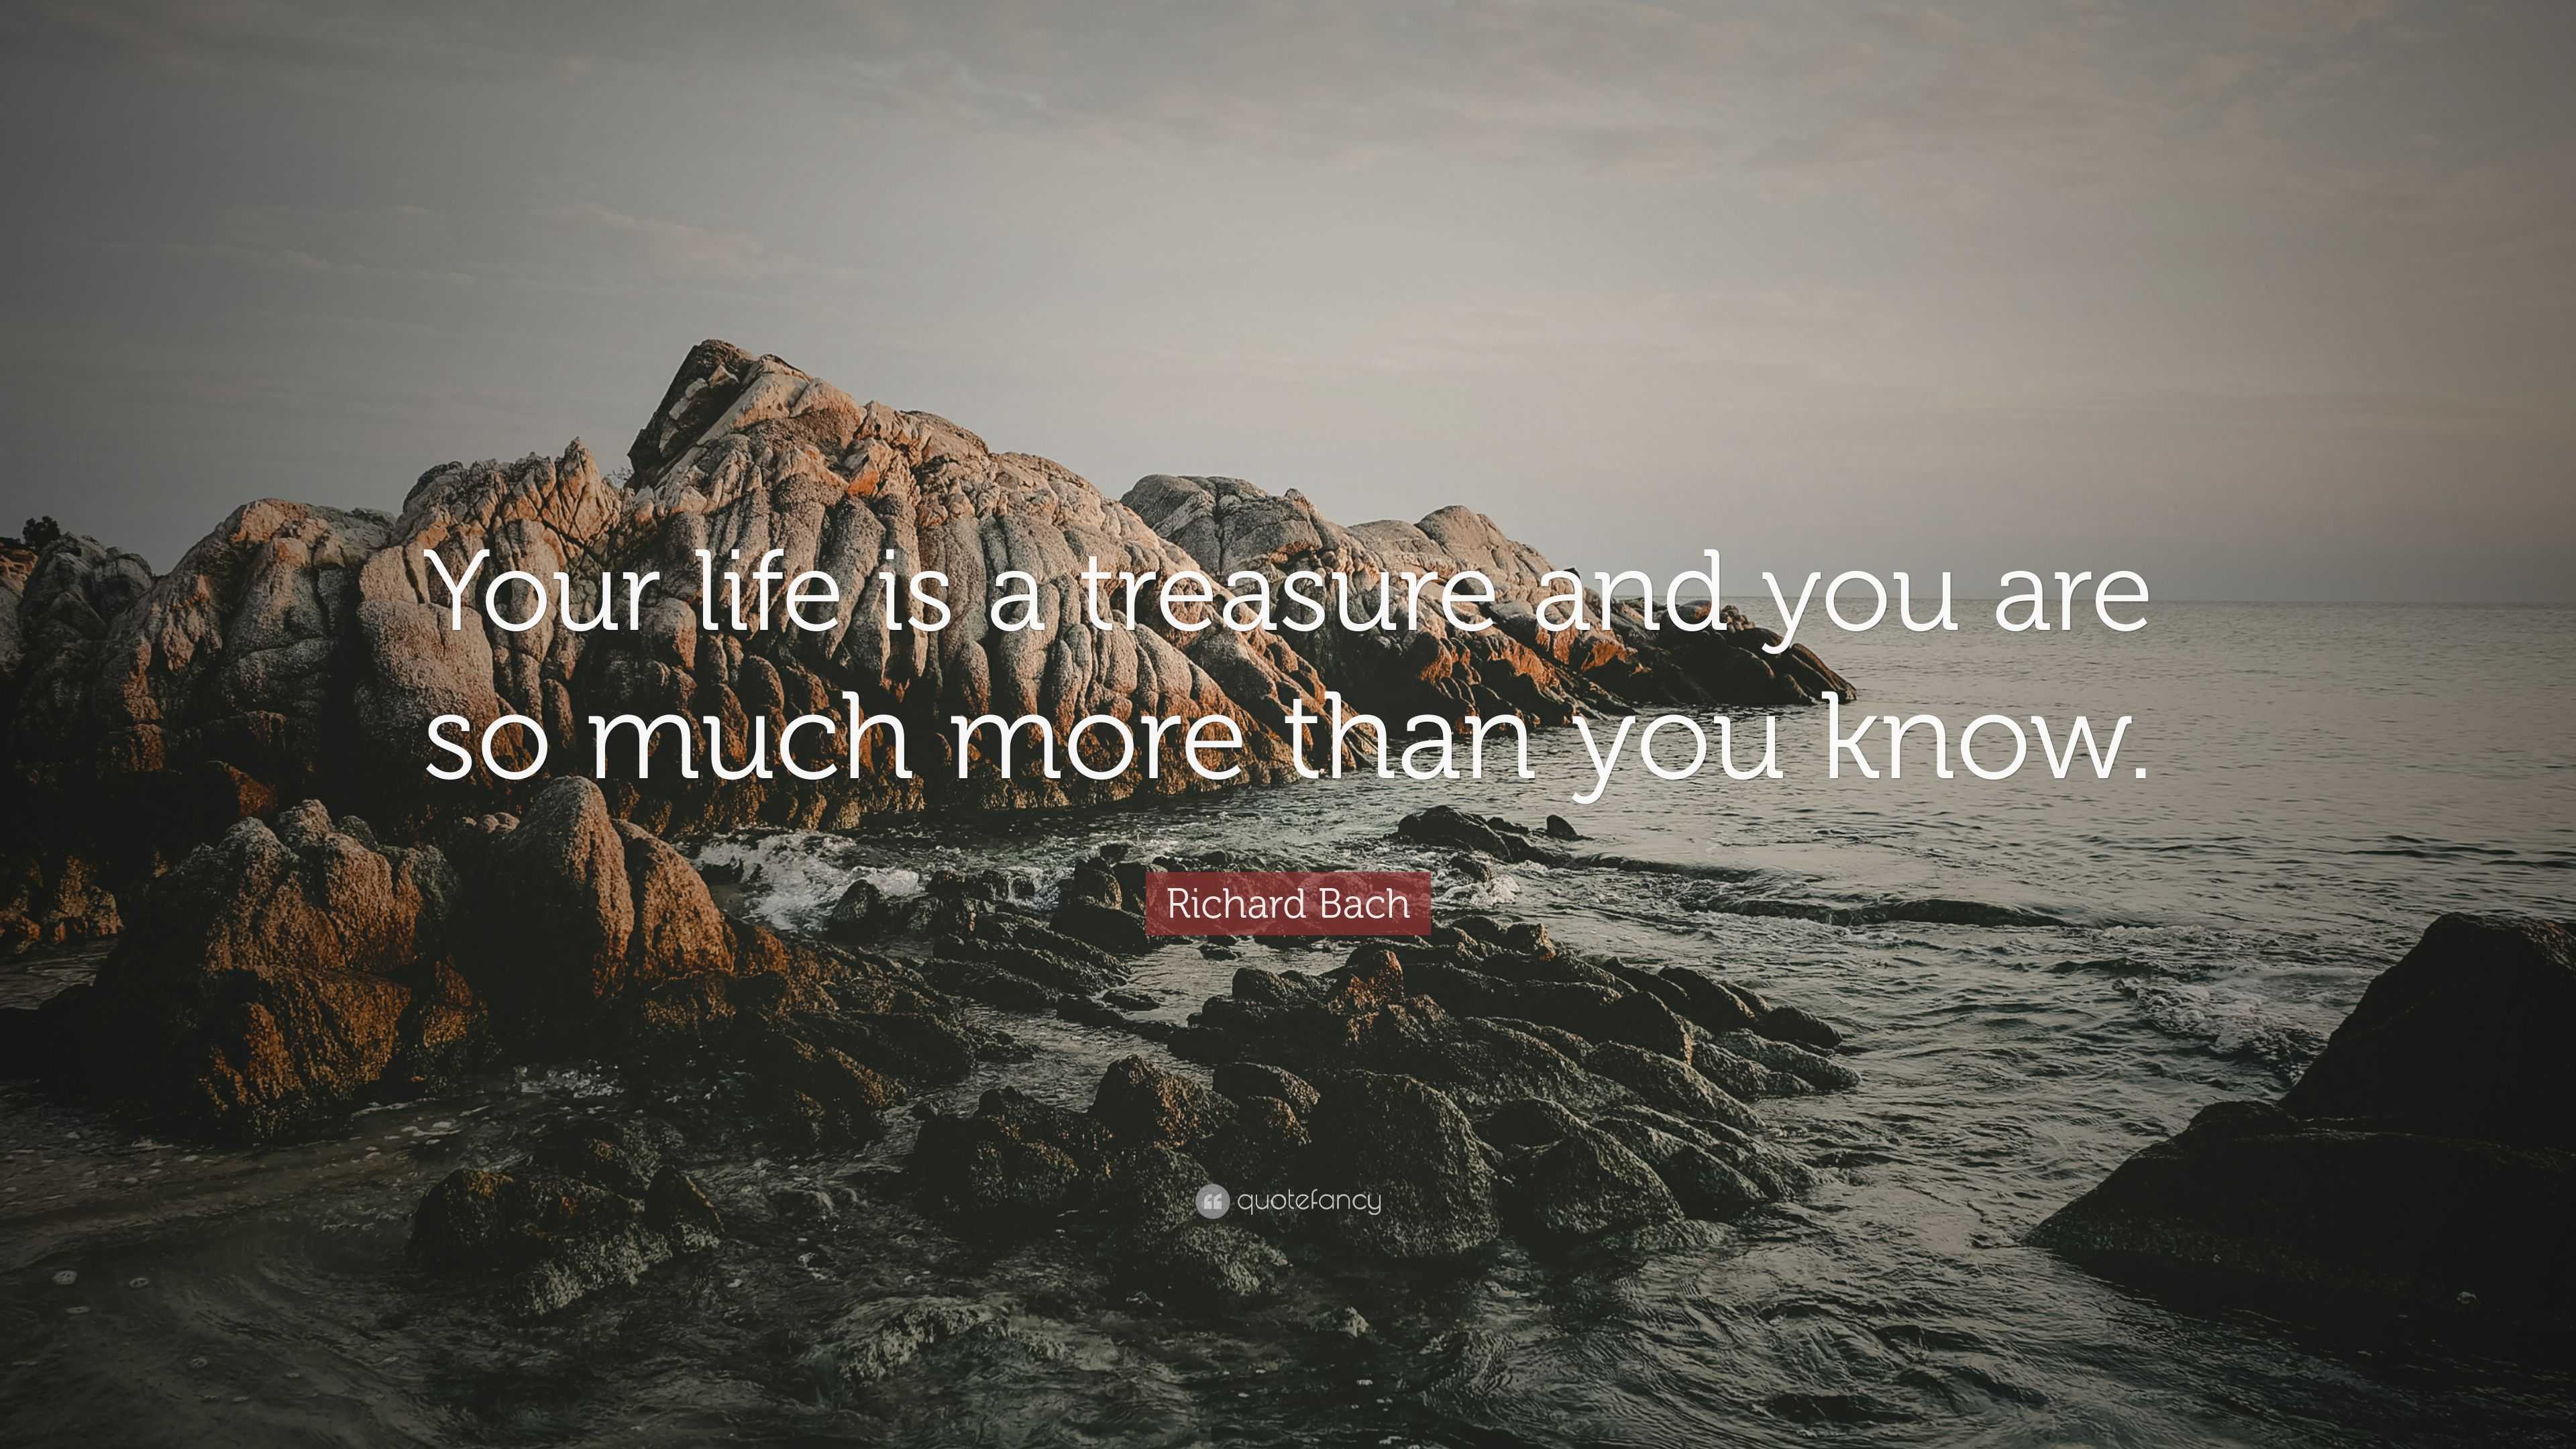 Richard Bach Quote: “Your life is a treasure and you are so much more ...